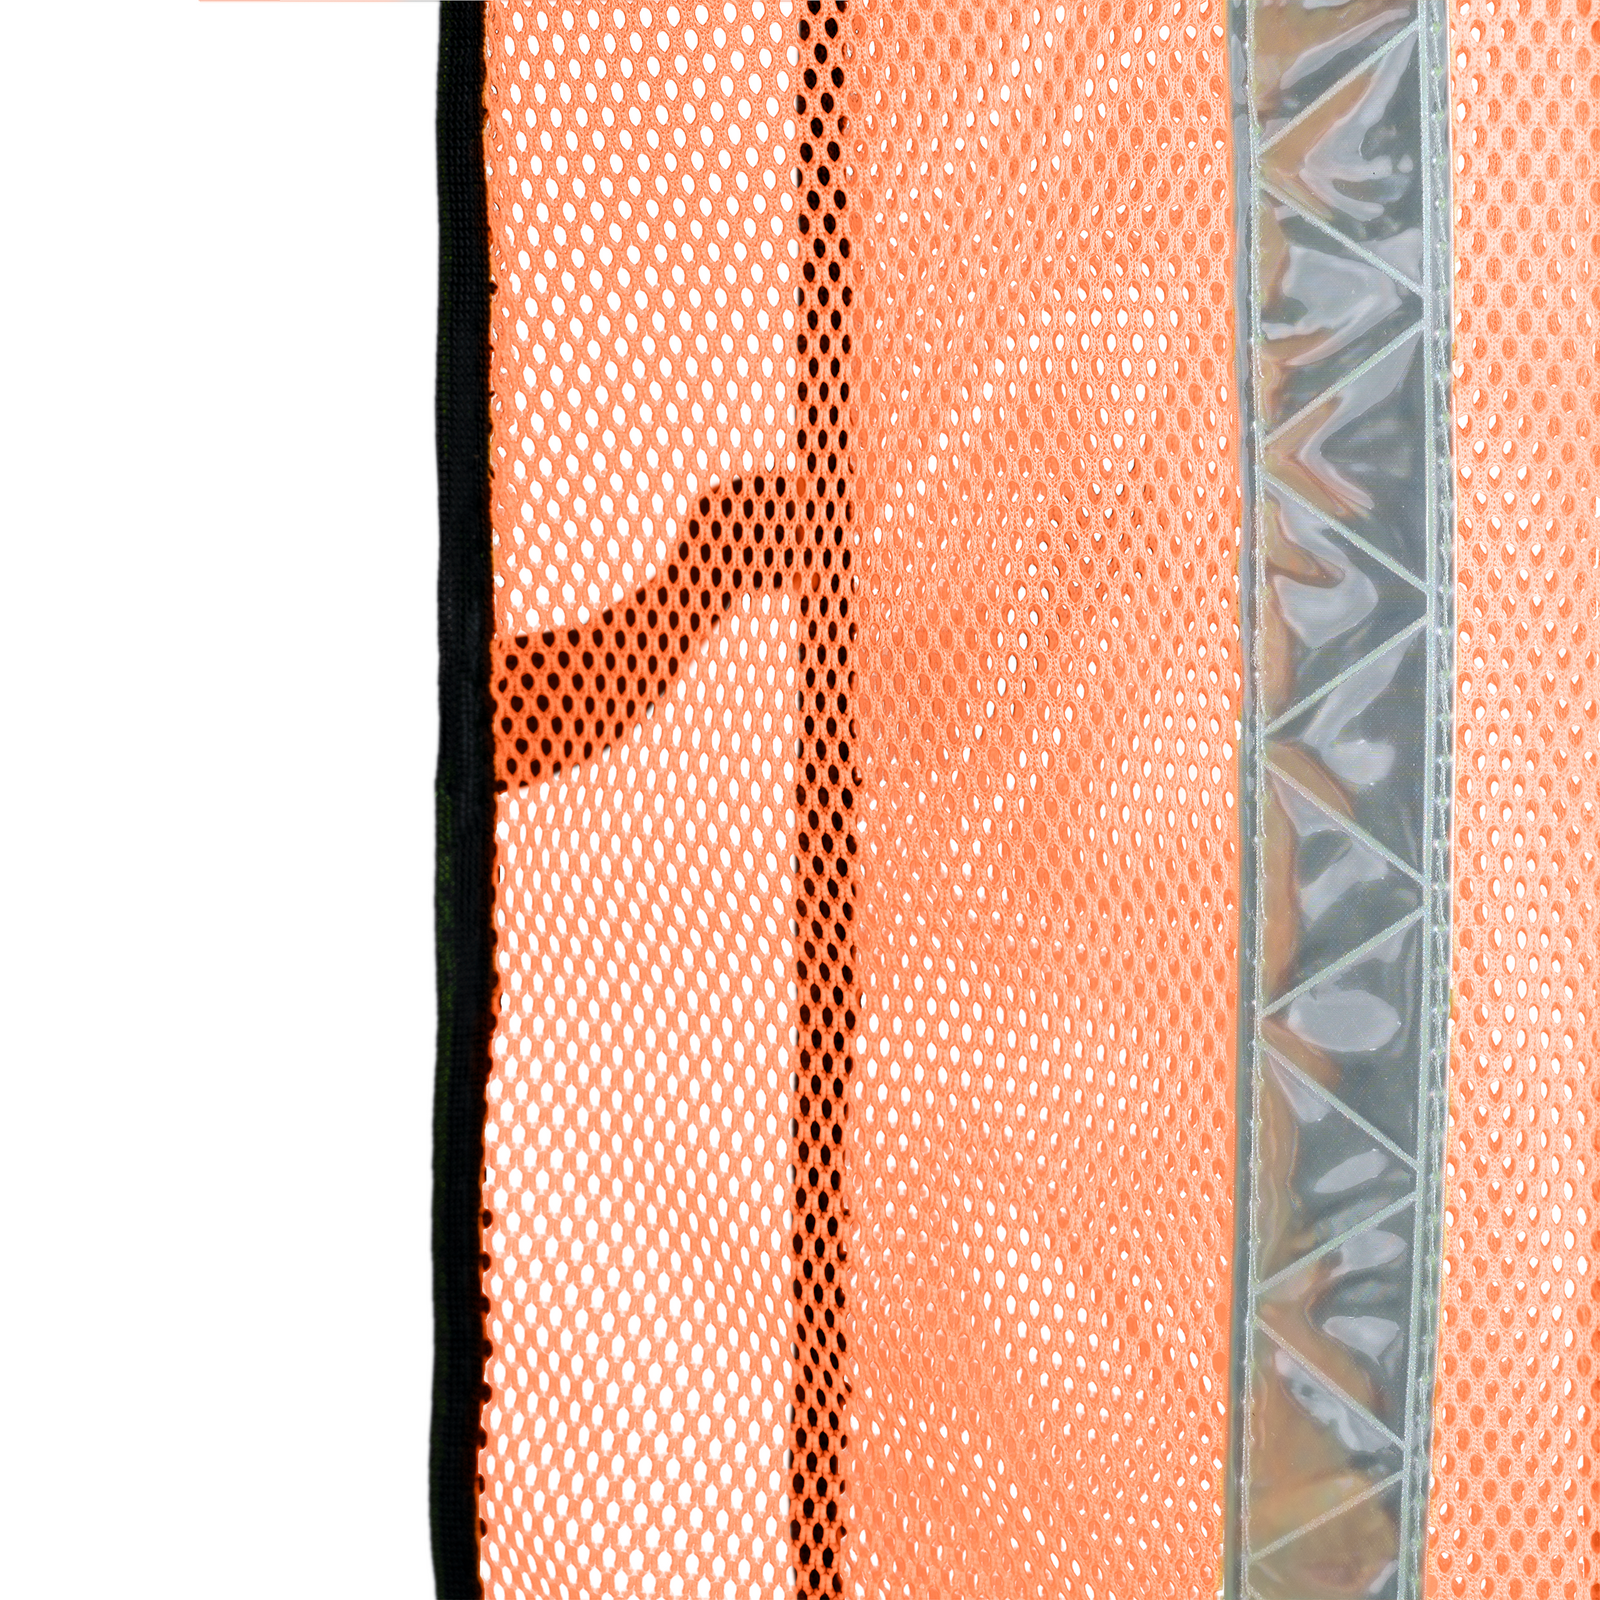 Close up showing the hi visibility orange mesh and the reflective stripe on the safety vest